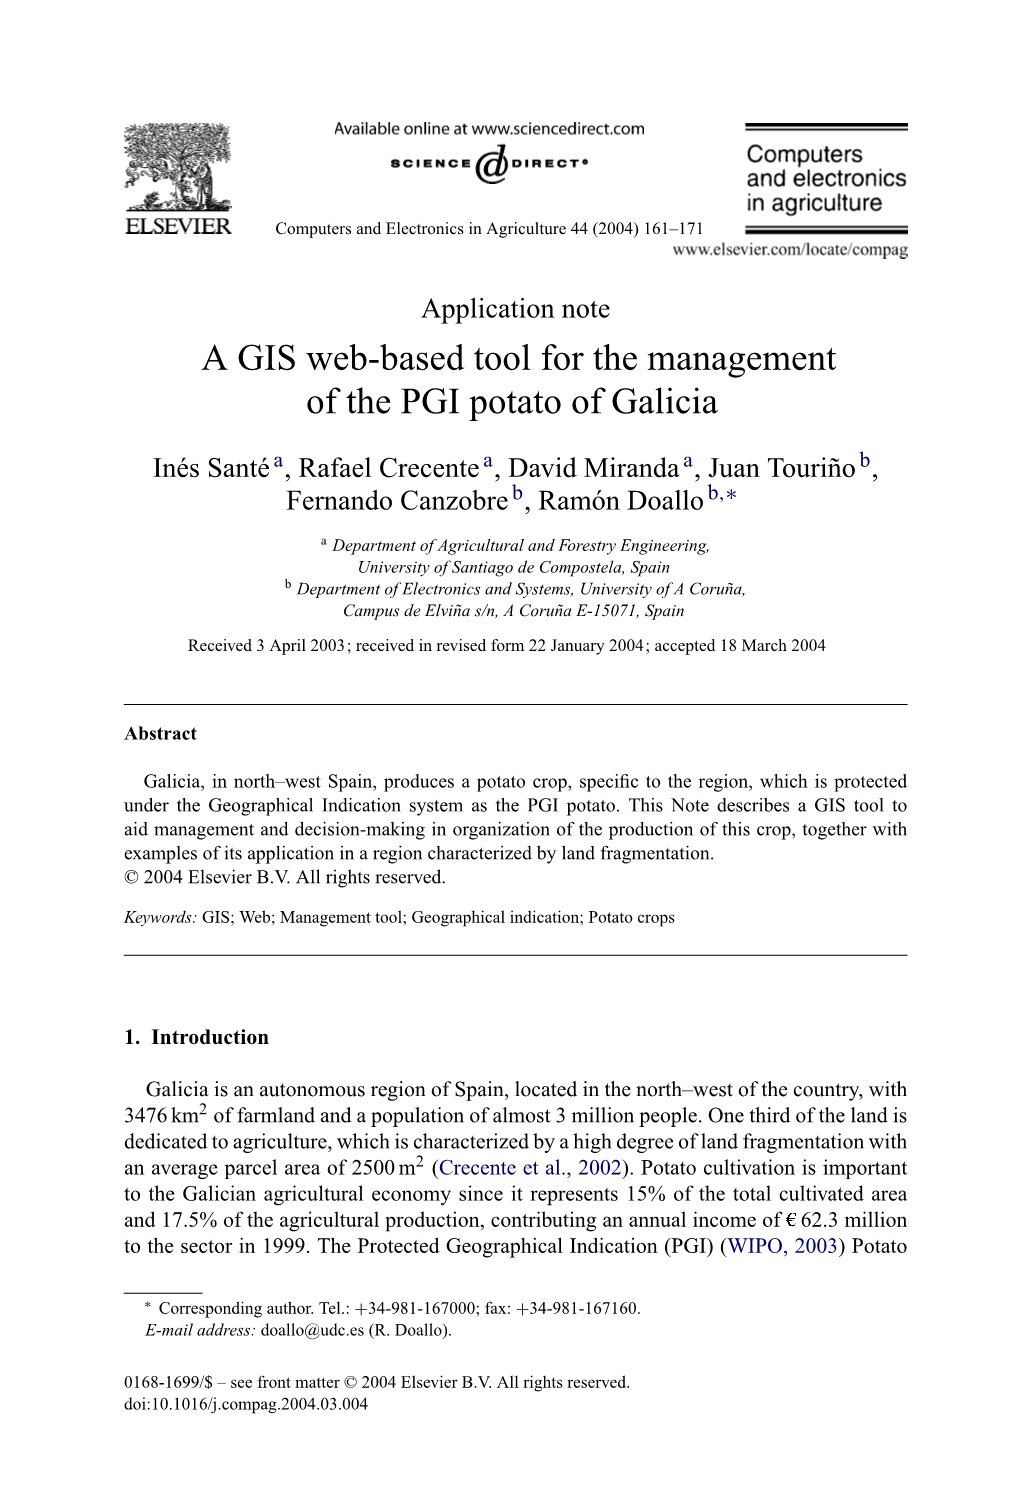 A GIS Web-Based Tool for the Management of the PGI Potato of Galicia